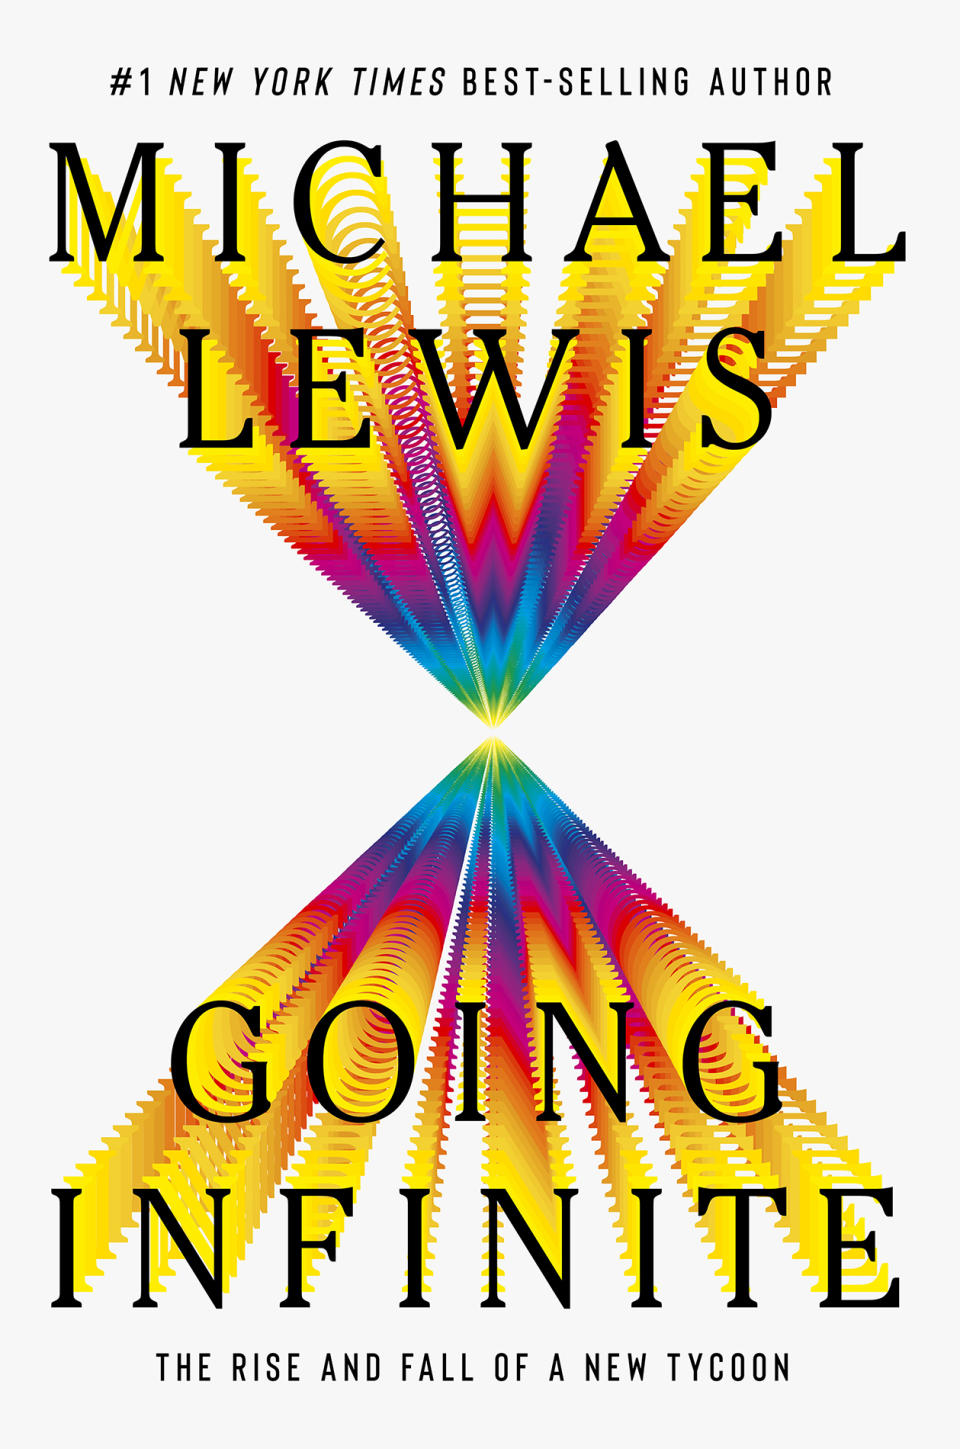 This cover image released by W. W. Norton shows "Going Infinite: The Rise and Fall of a New Tycoon" by Michael Lewis. (W. W. Norton via AP)